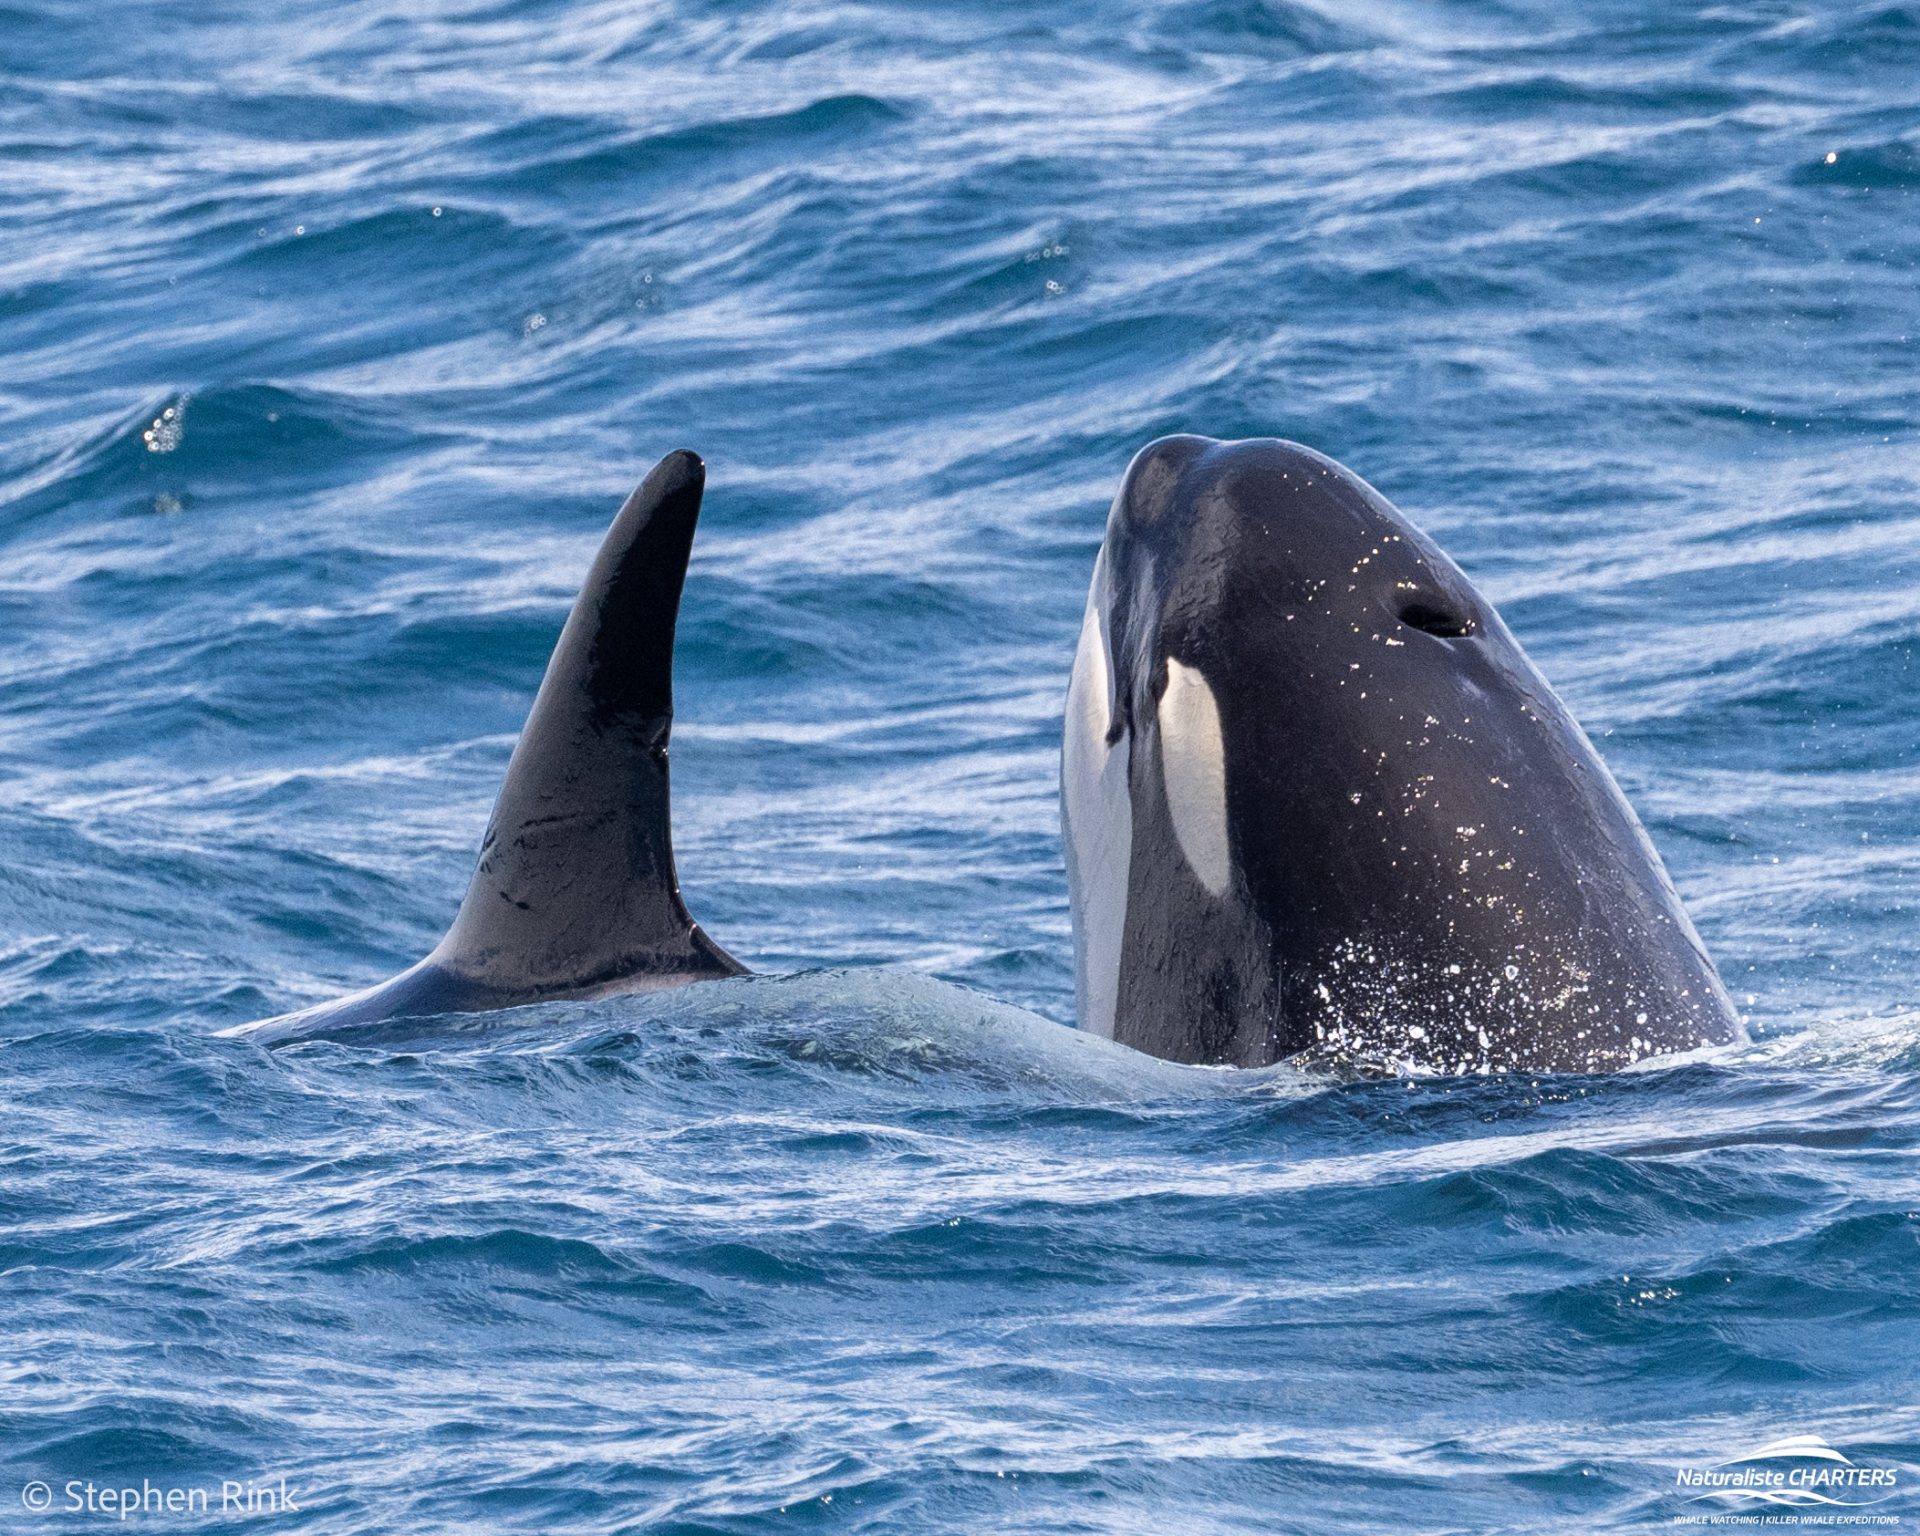 Spyhopping is a popular move so orca can view their above ocean environment